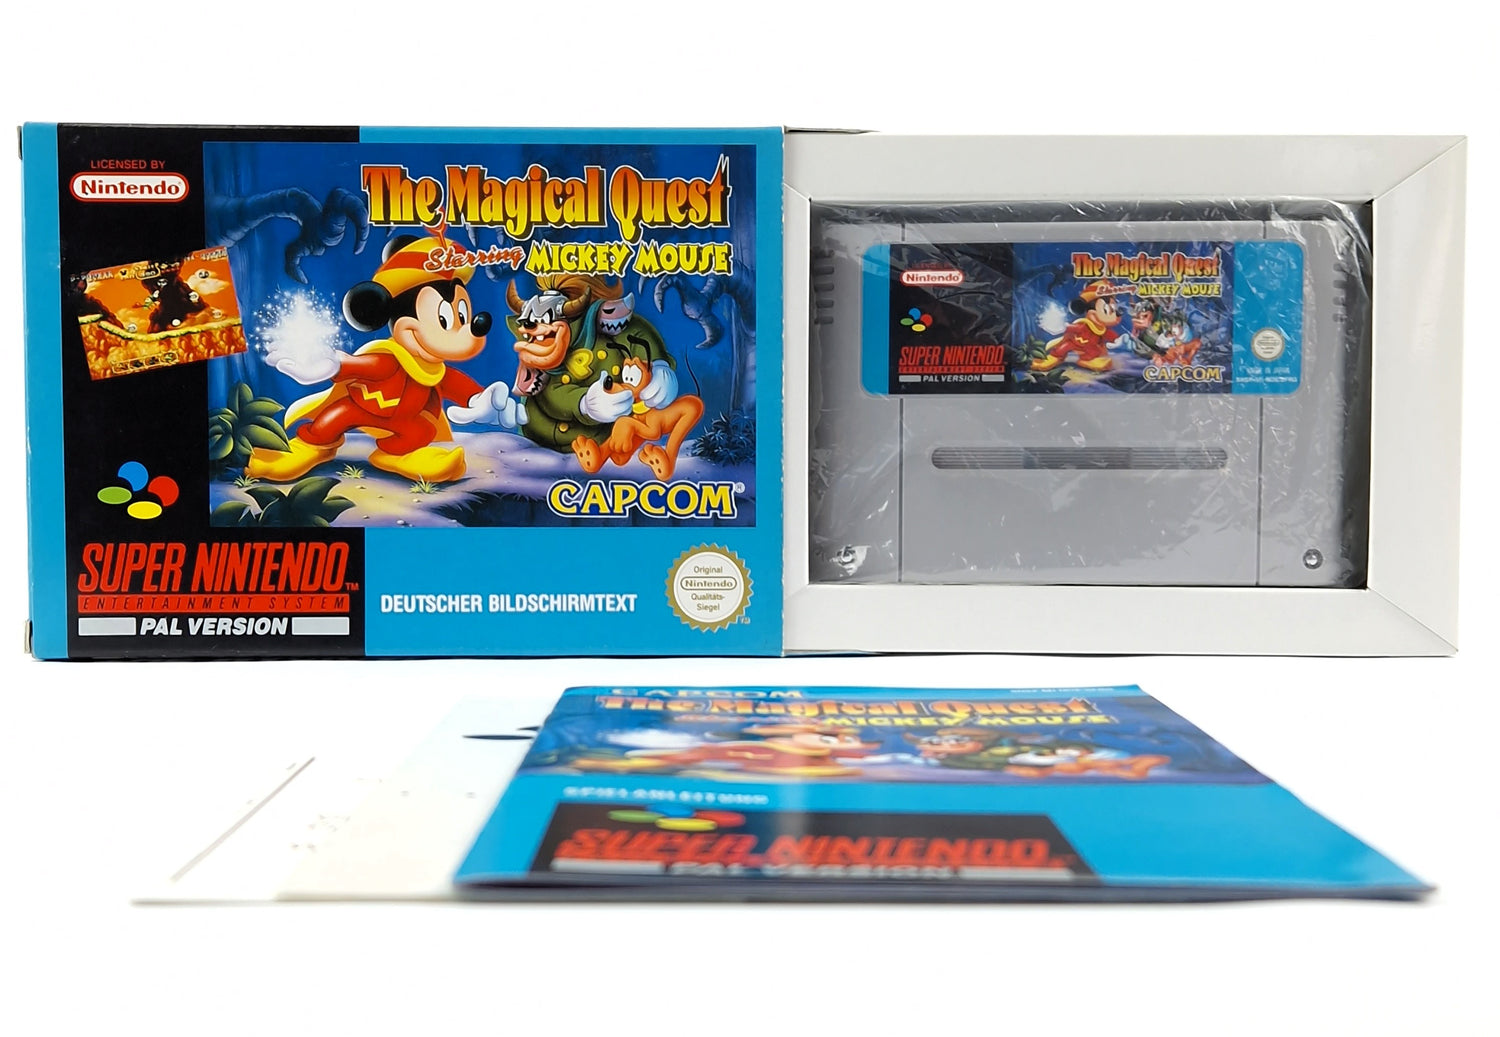 Super Nintendo Game: The Magical Quest Mickey M - SNES Module Instructions OVP cib